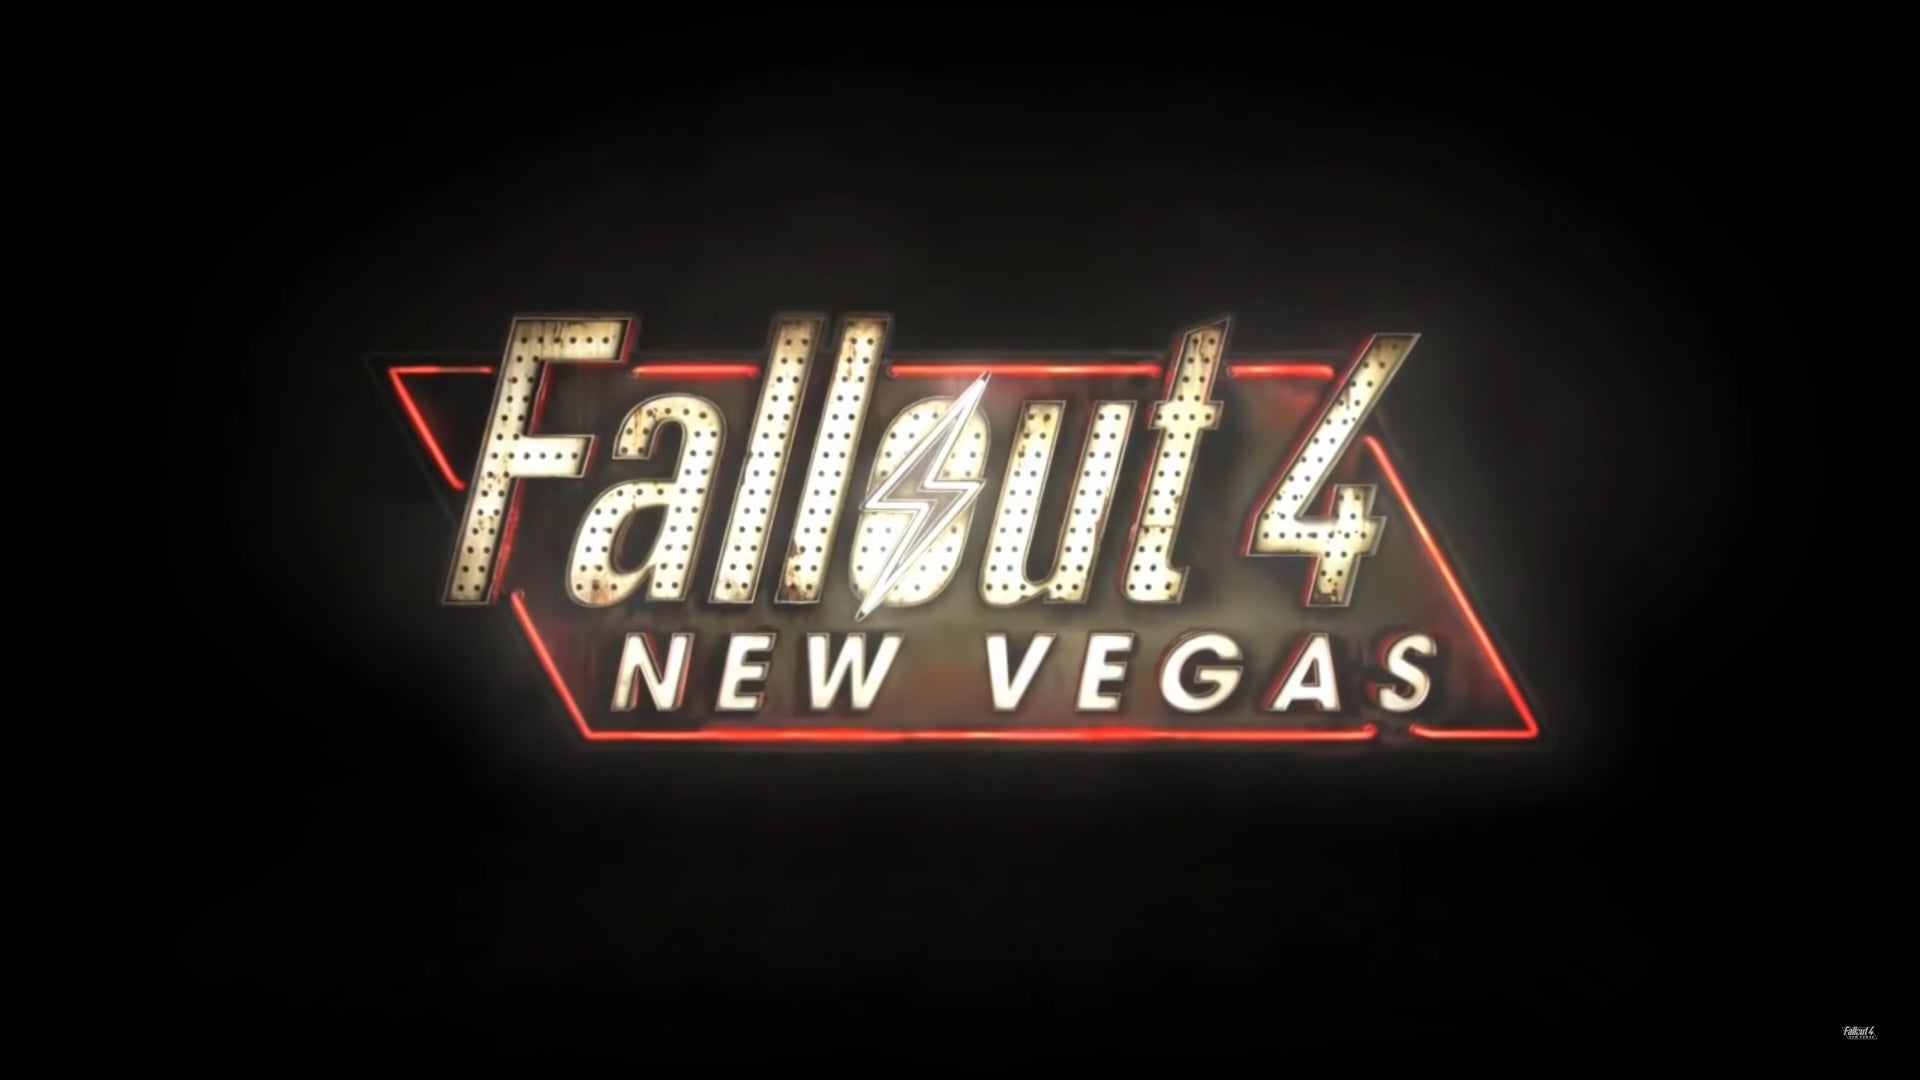 Image for Fallout 4 New Vegas mod shows off initial gameplay footage